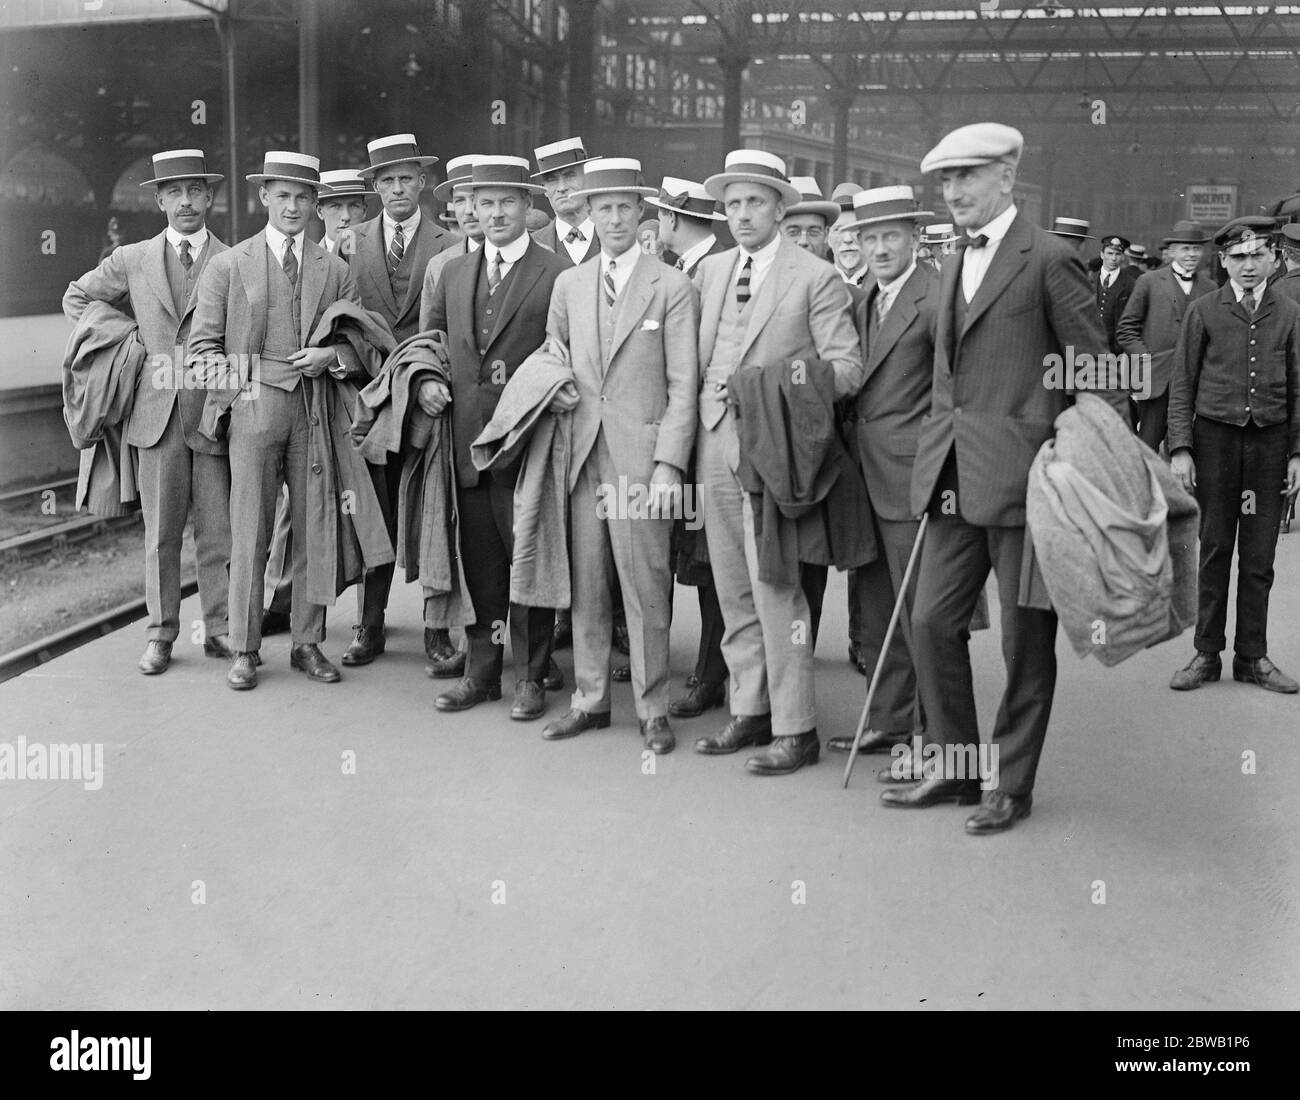 Canadian cricketers arrive at Waterloo Station A team of Canadian cricketers under the captaincy of Mr Norman Seagram President of the Toronto Cricket Club , arrived in London on Thursday . They will play at the Oval and also at Lords where they will meet the MCC and also a team selected from the House of Lords and House of Commons . 27 July 1922 Stock Photo